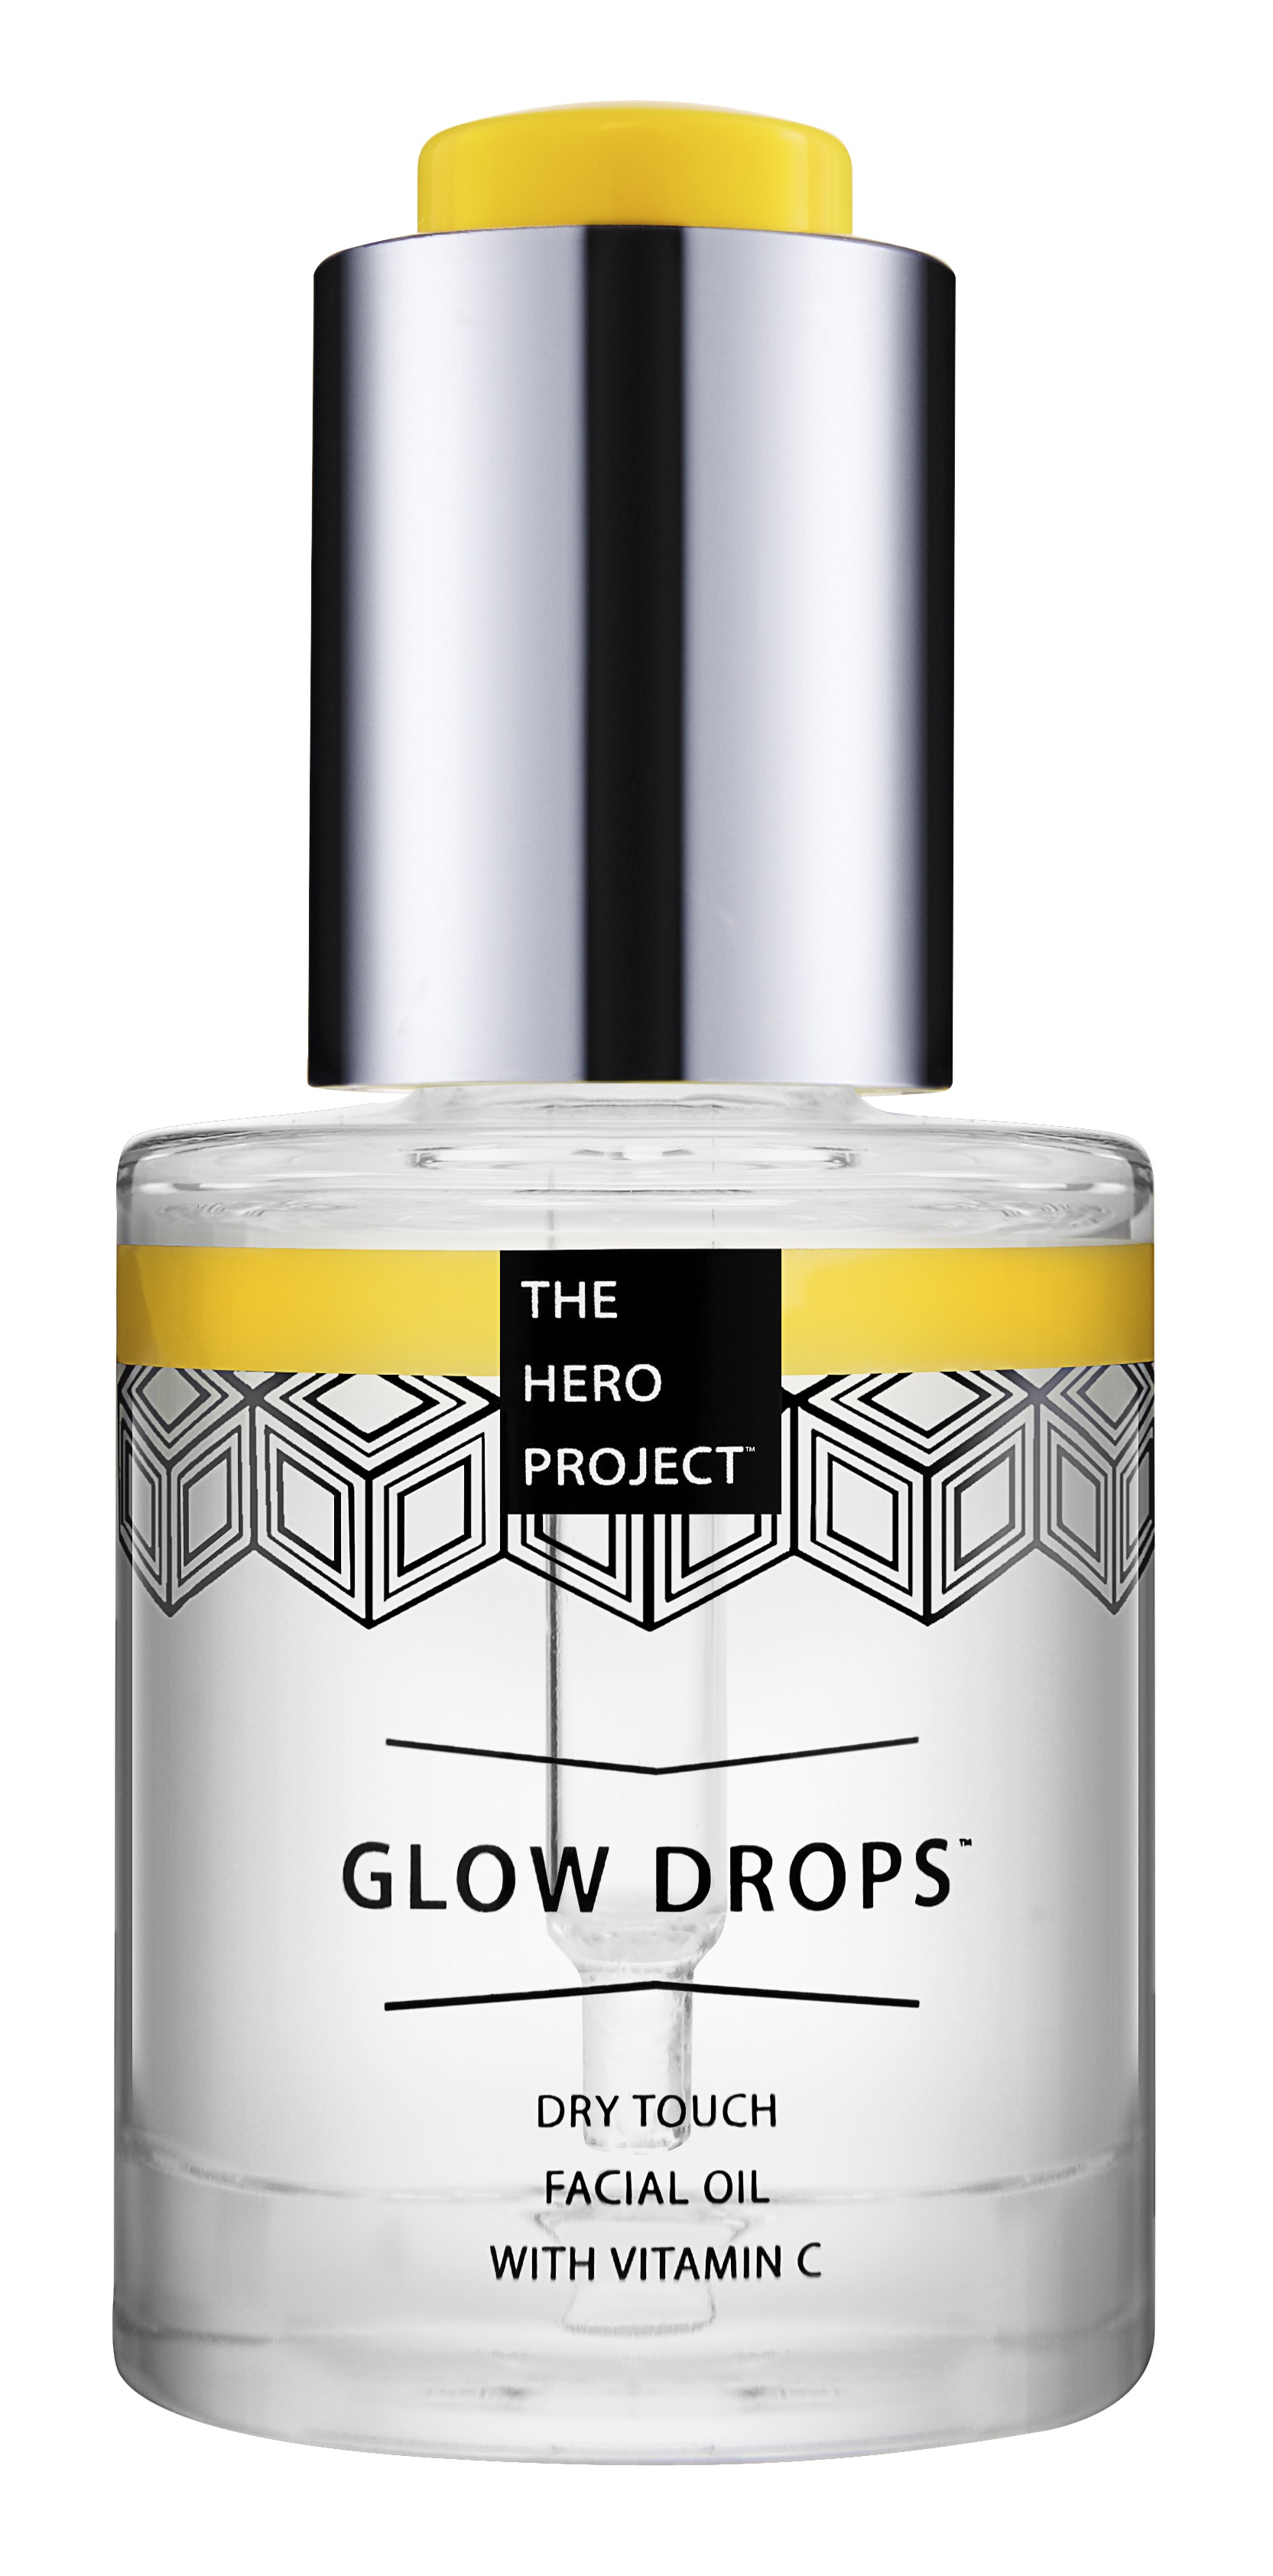 The Hero Project Glow Drops® Dry Touch Facial Oil + vitamin C 